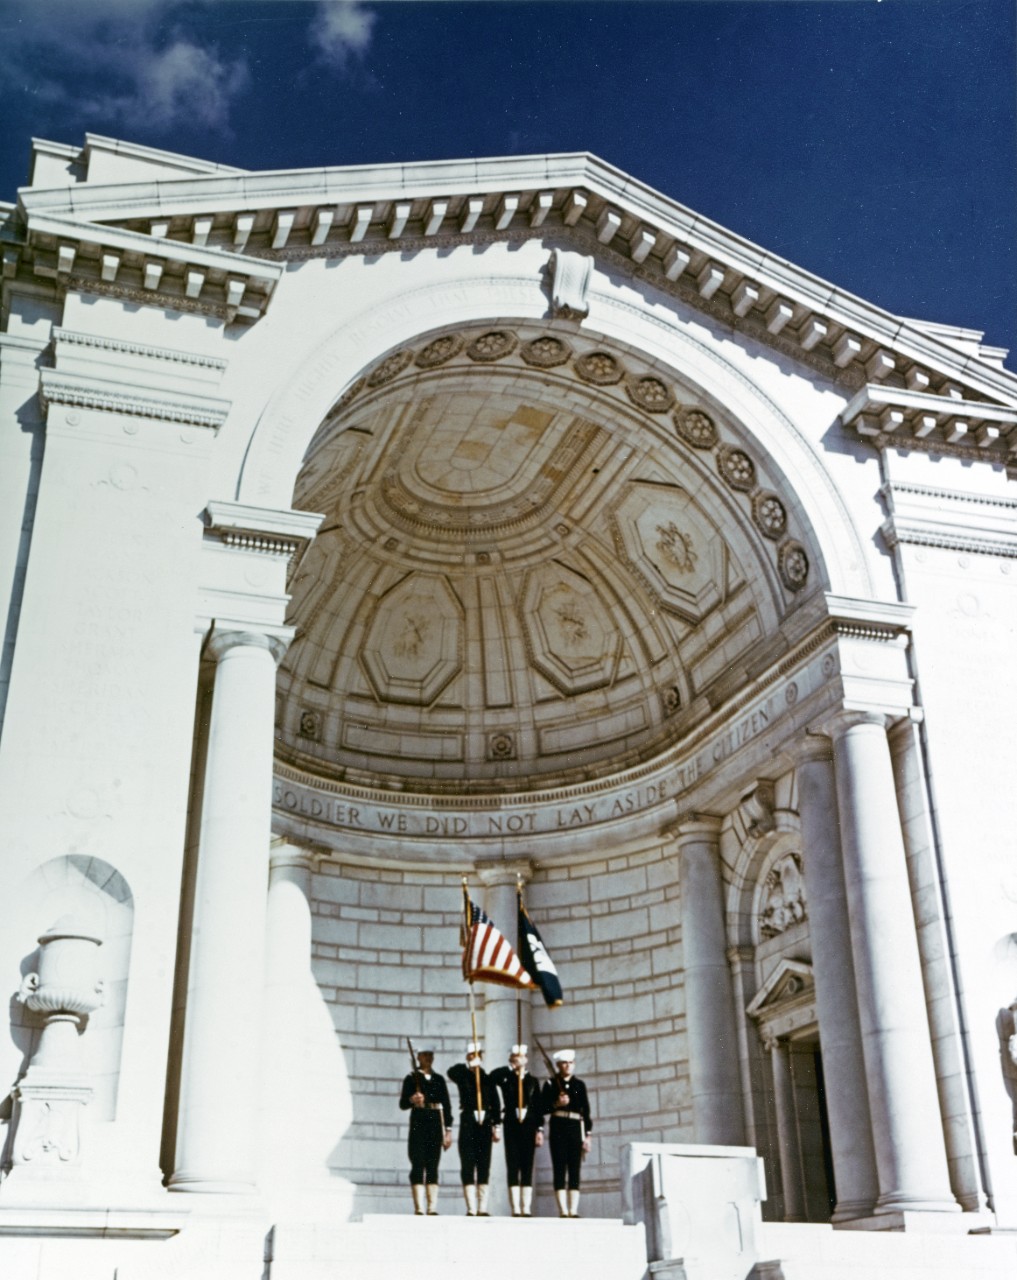 Framed by the columns and arch of the rostrum of the Arlington National Cemetery Amphitheater, a Navy color guard pays tribute to the fighting men who have given their lives for their nation. Photographed during the Second World War.